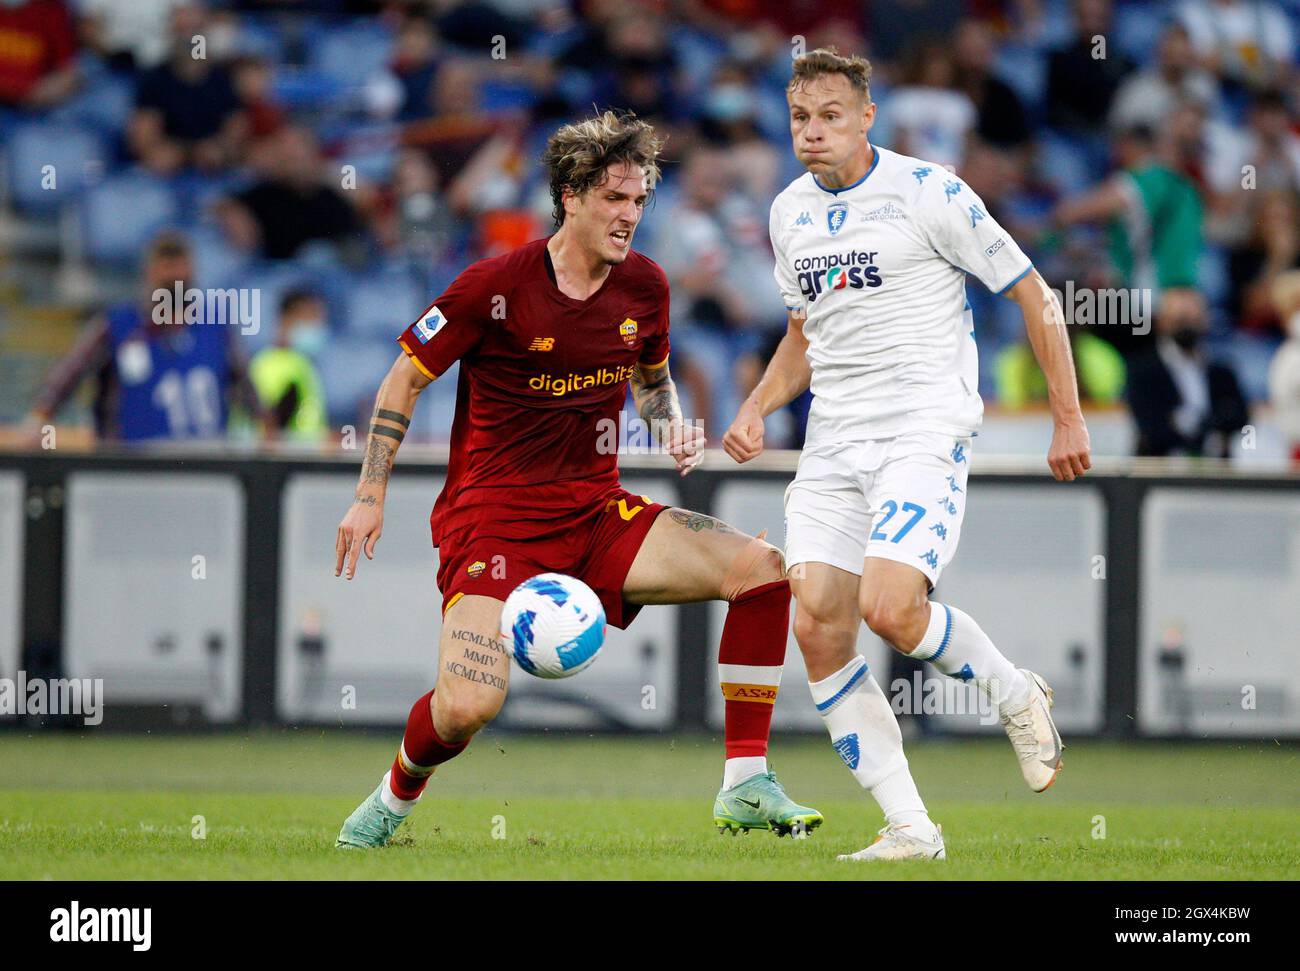 Rome, Italy. 3rd Oct, 2021. NicoloÕ Zaniolo, of AS Roma, left, is challenged by Szymon Zurkowski, of Empoli, during the Serie A football match between Roma and Empoli at the Olympic stadium. Credit: Riccardo De Luca - Update Images/Alamy Live News Stock Photo